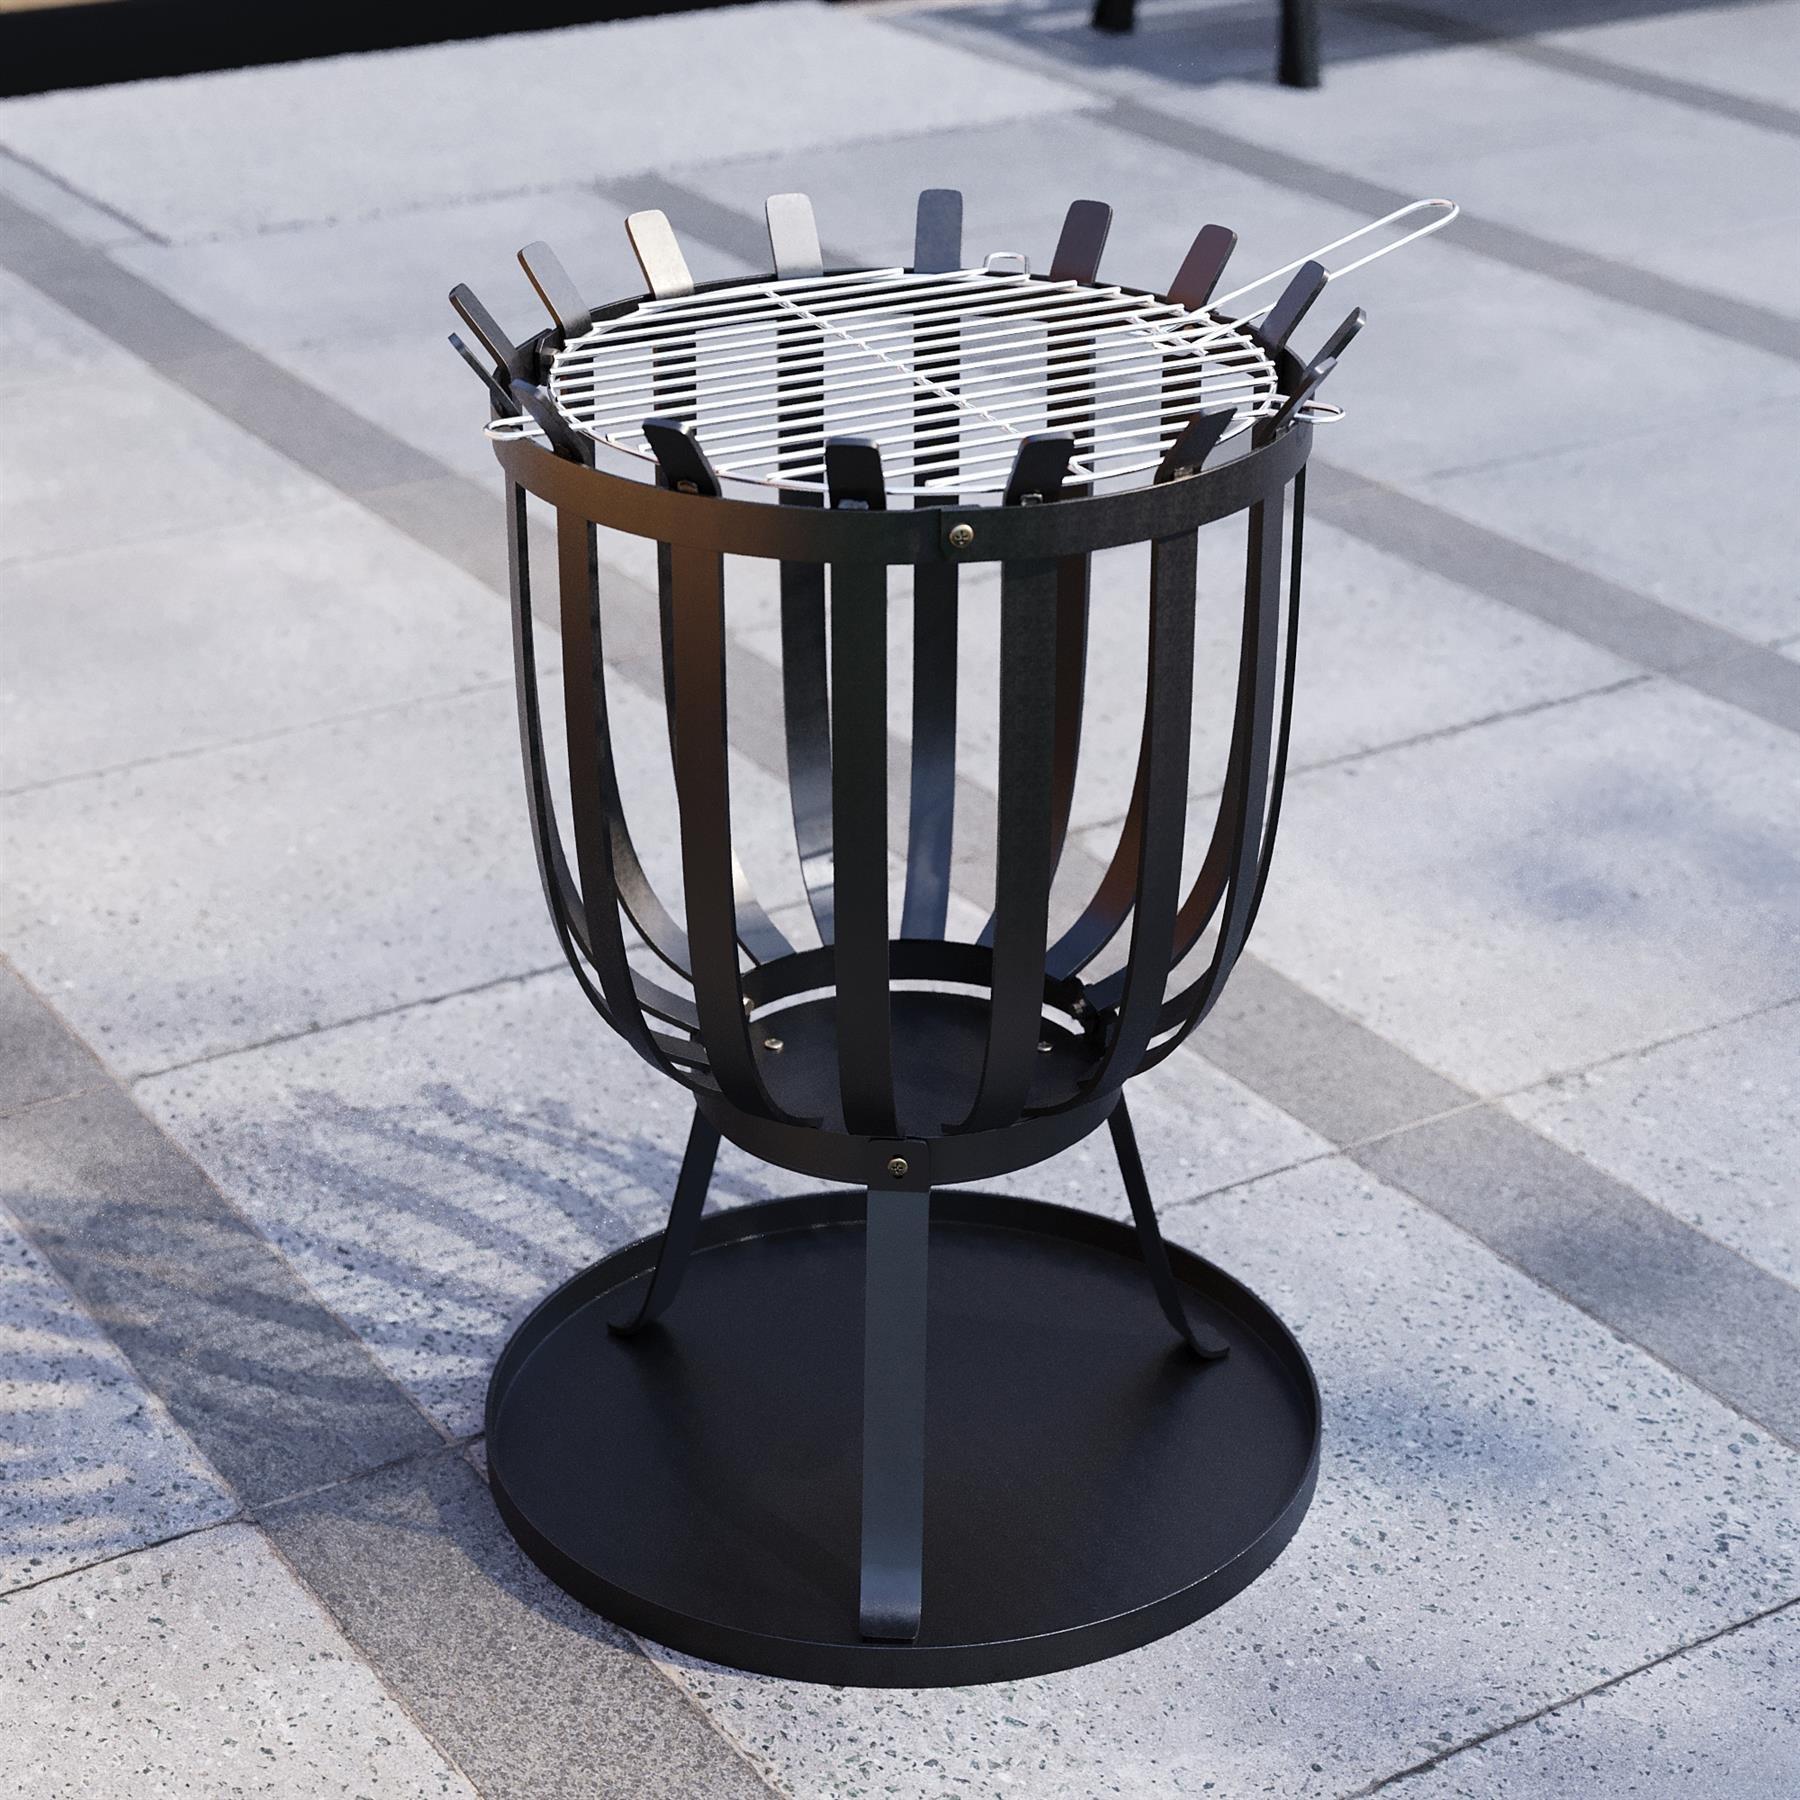 Fire Vida Steel Brazier Black Square Outdoor Fire Pit Cooking Grill